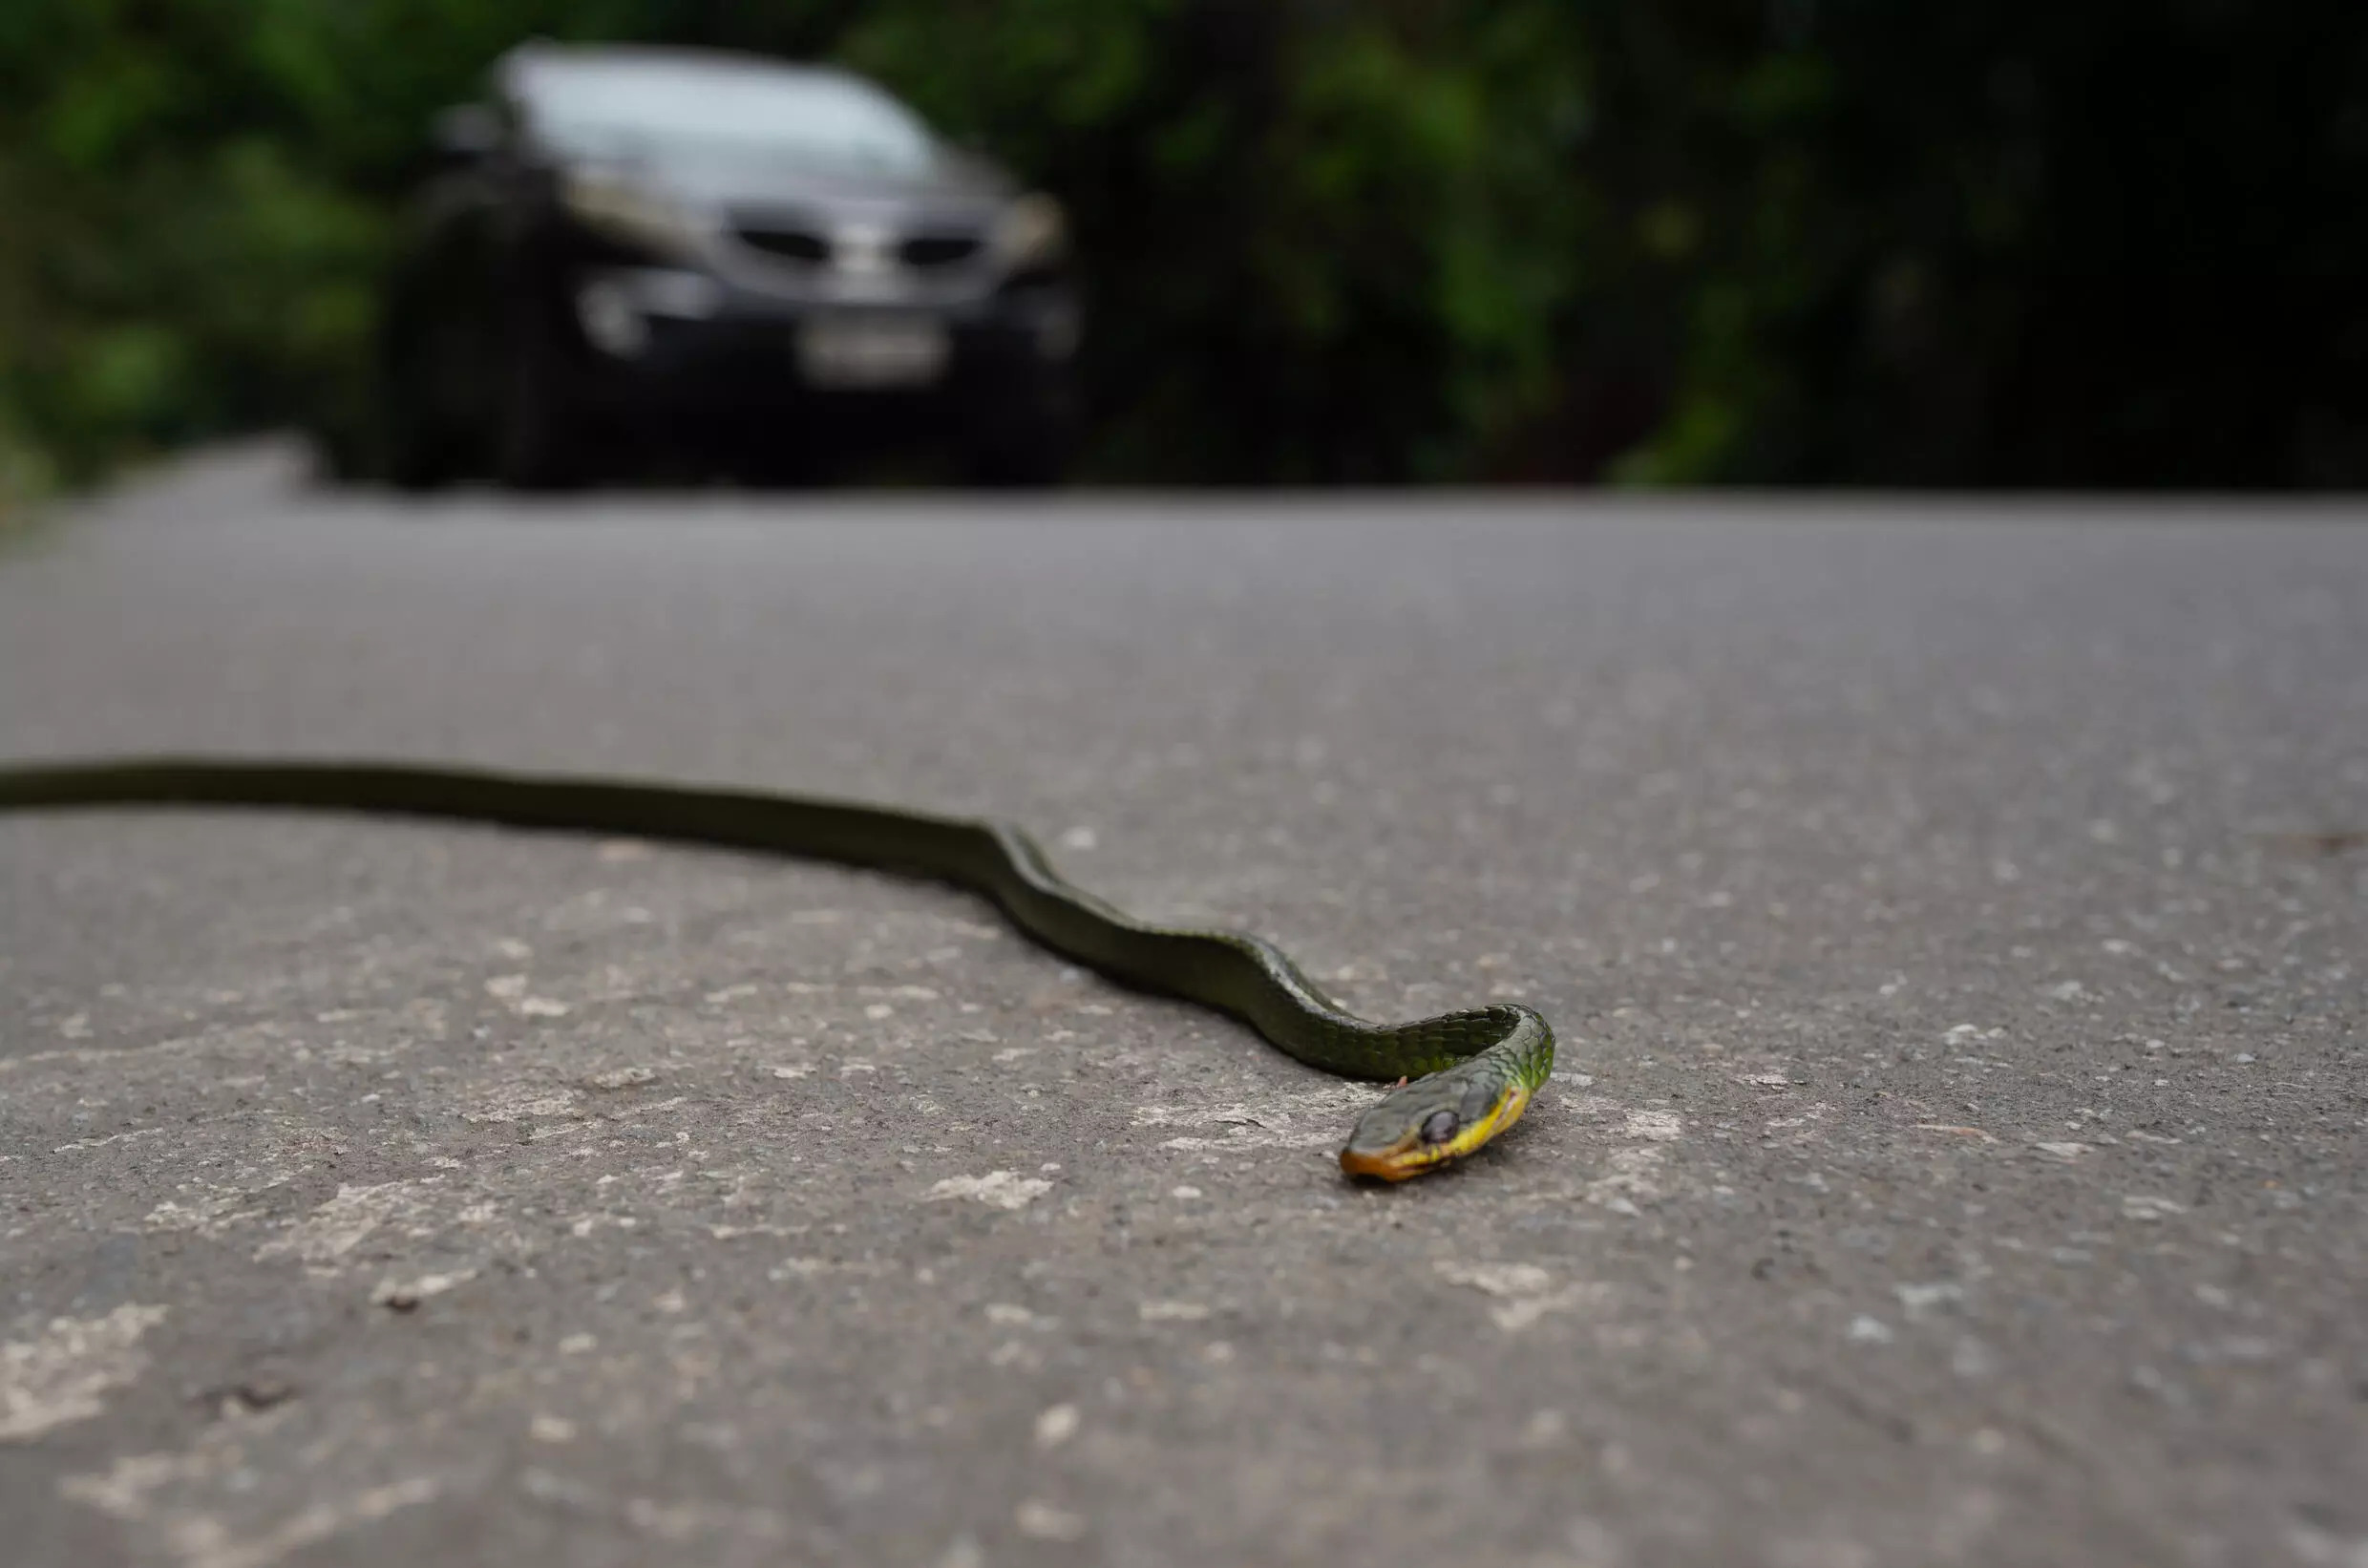 About 16 wild animals become roadkill every second in Brazil, the world's most biodiverse country. Photo: AFP